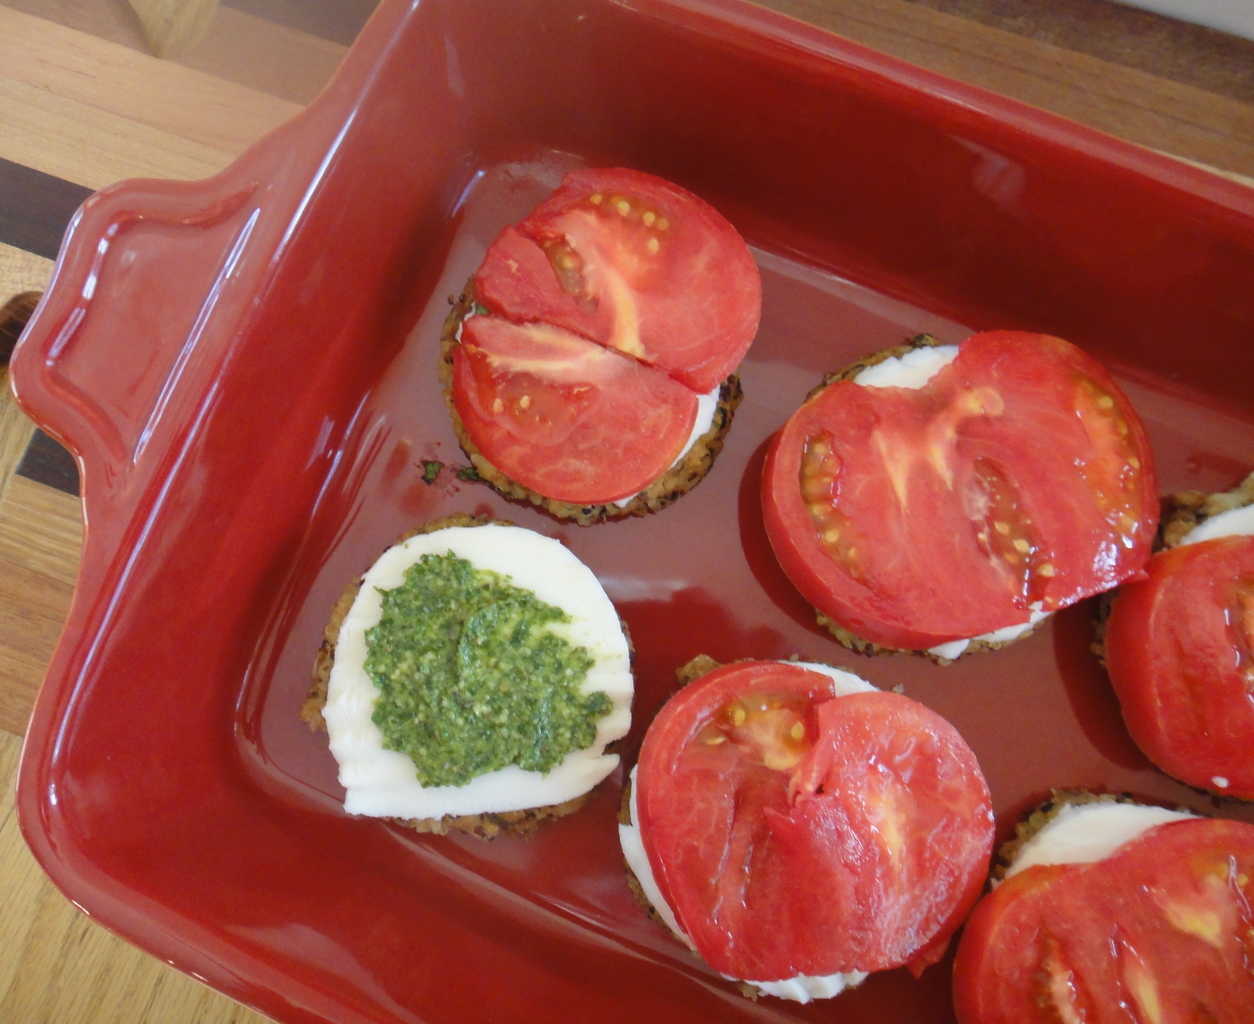 layers of veggie patties with mozzarella cheese, tomatoes and basil pesot